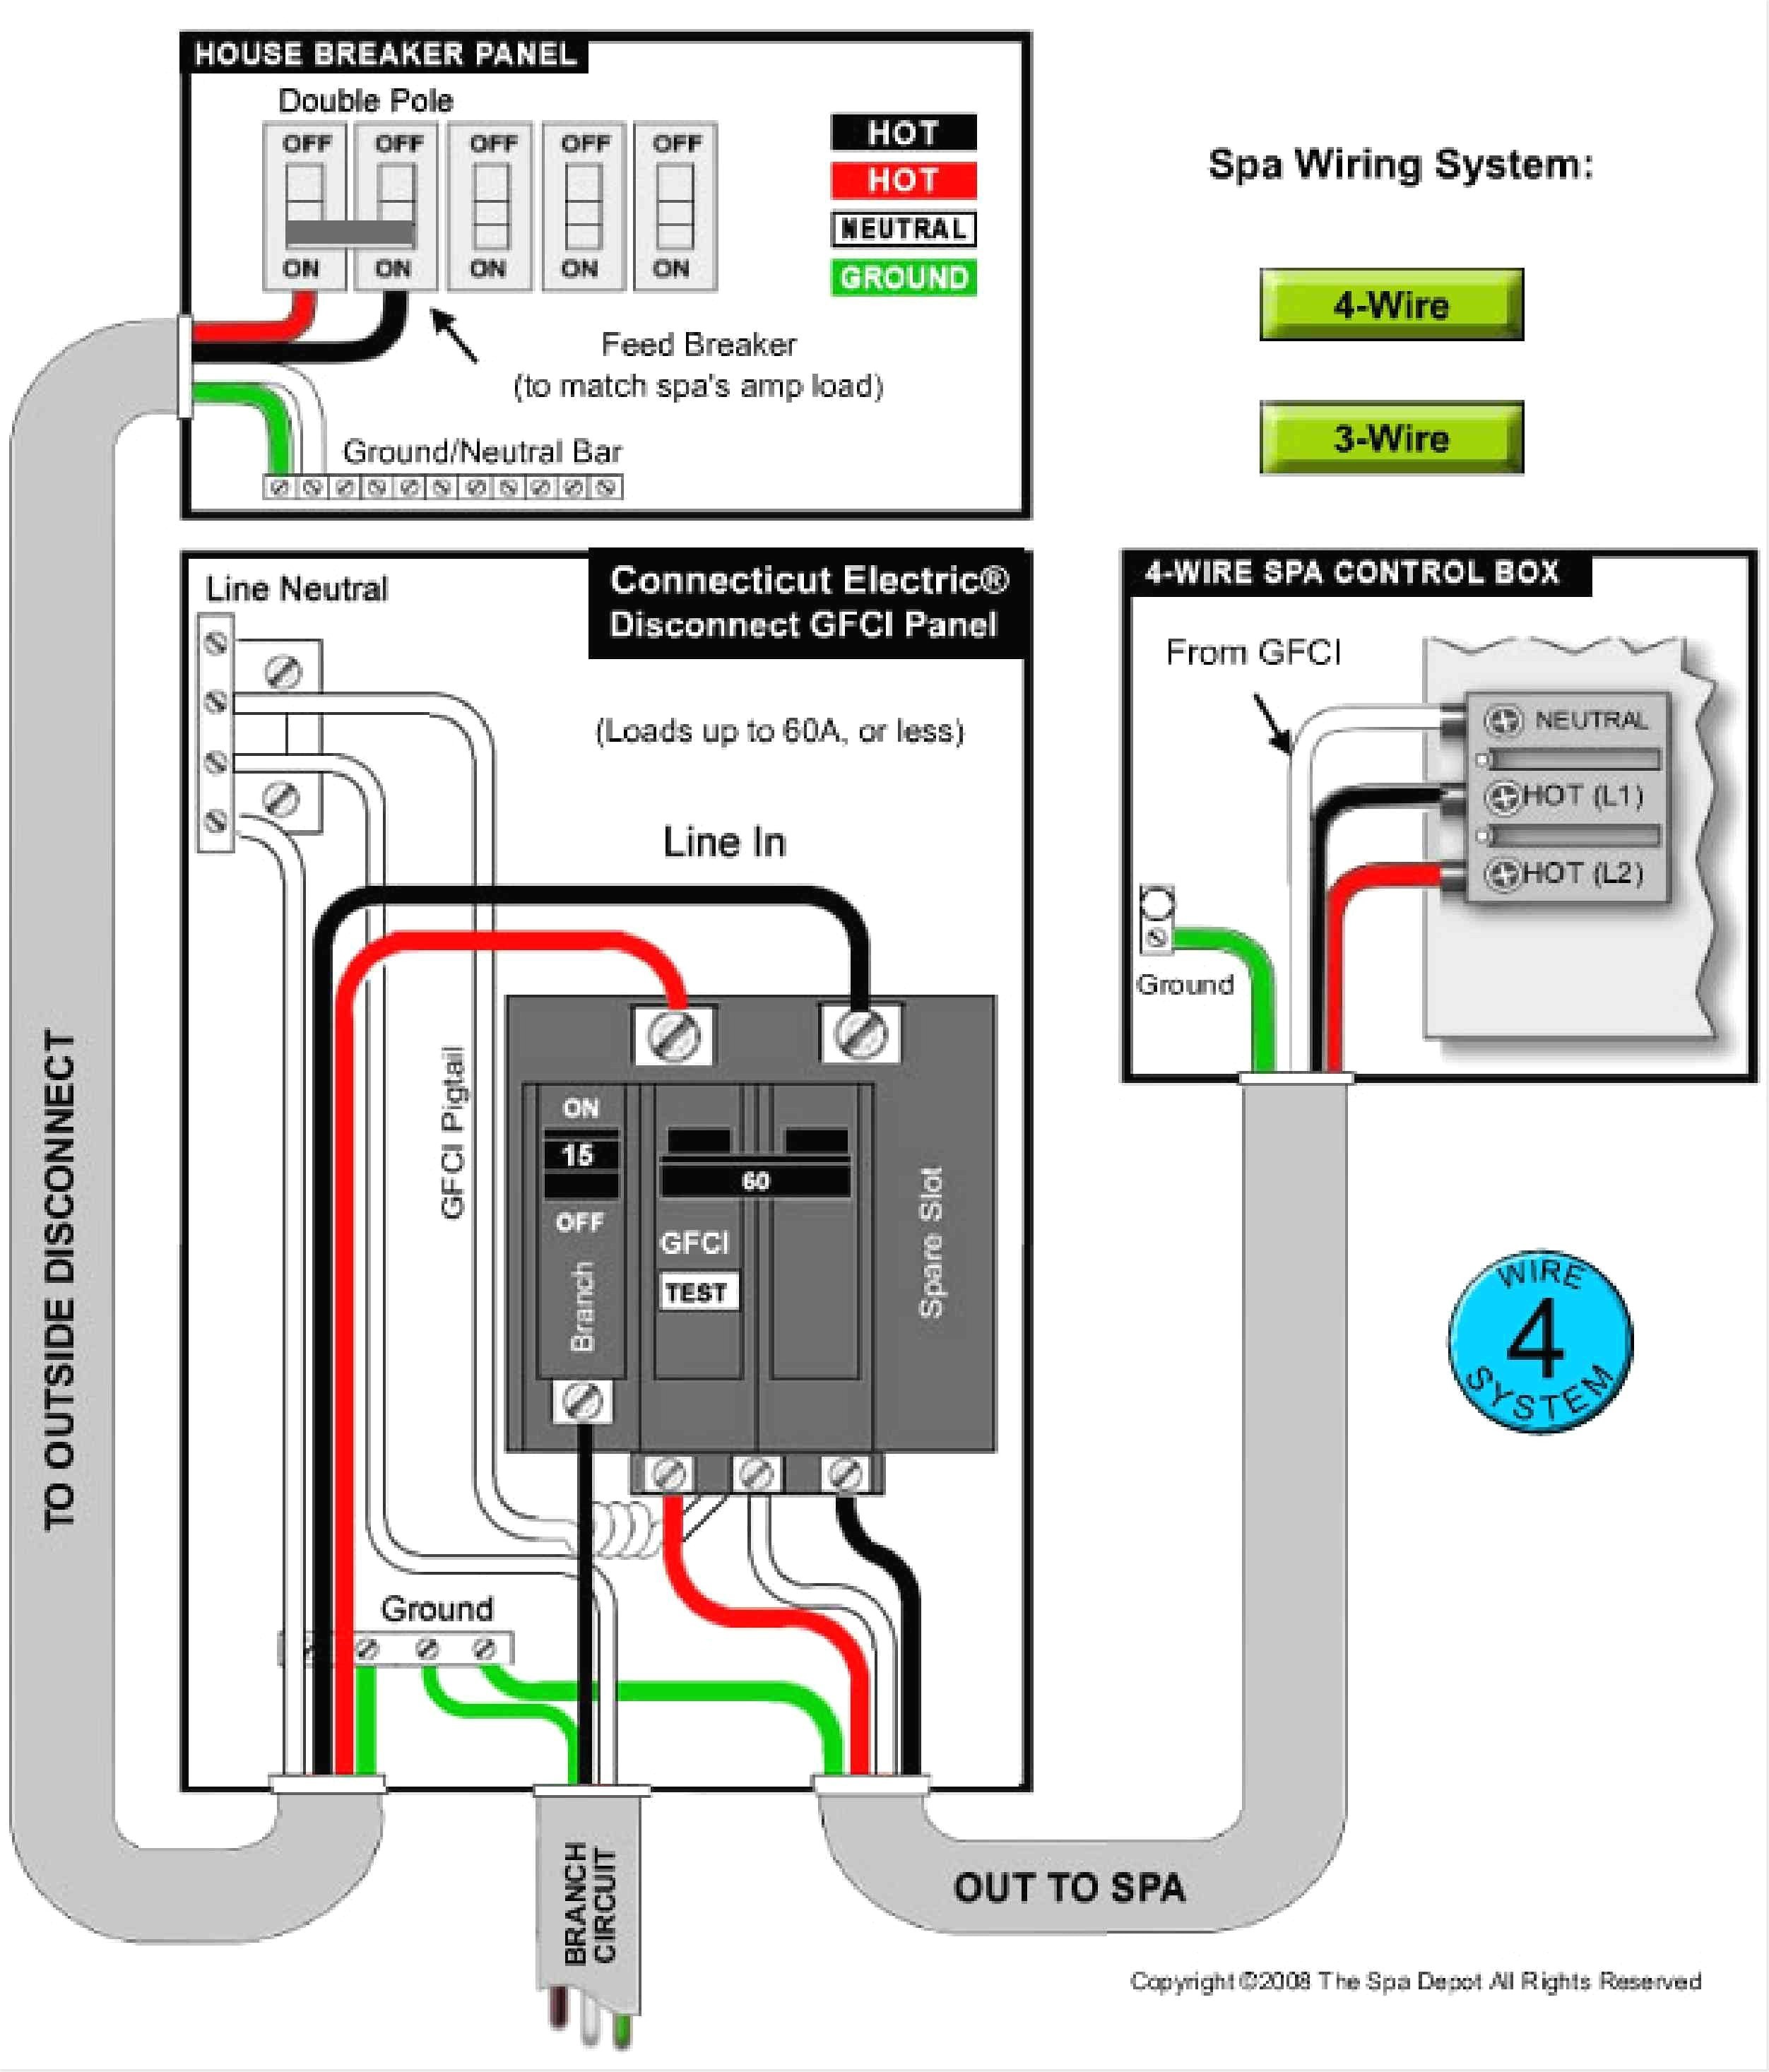 4 Wire 220 Volt Wiring Diagram Wiring Diagram Gfci Outlet Refrence Wiring Diagram for Gfci and Of 4 Wire 220 Volt Wiring Diagram